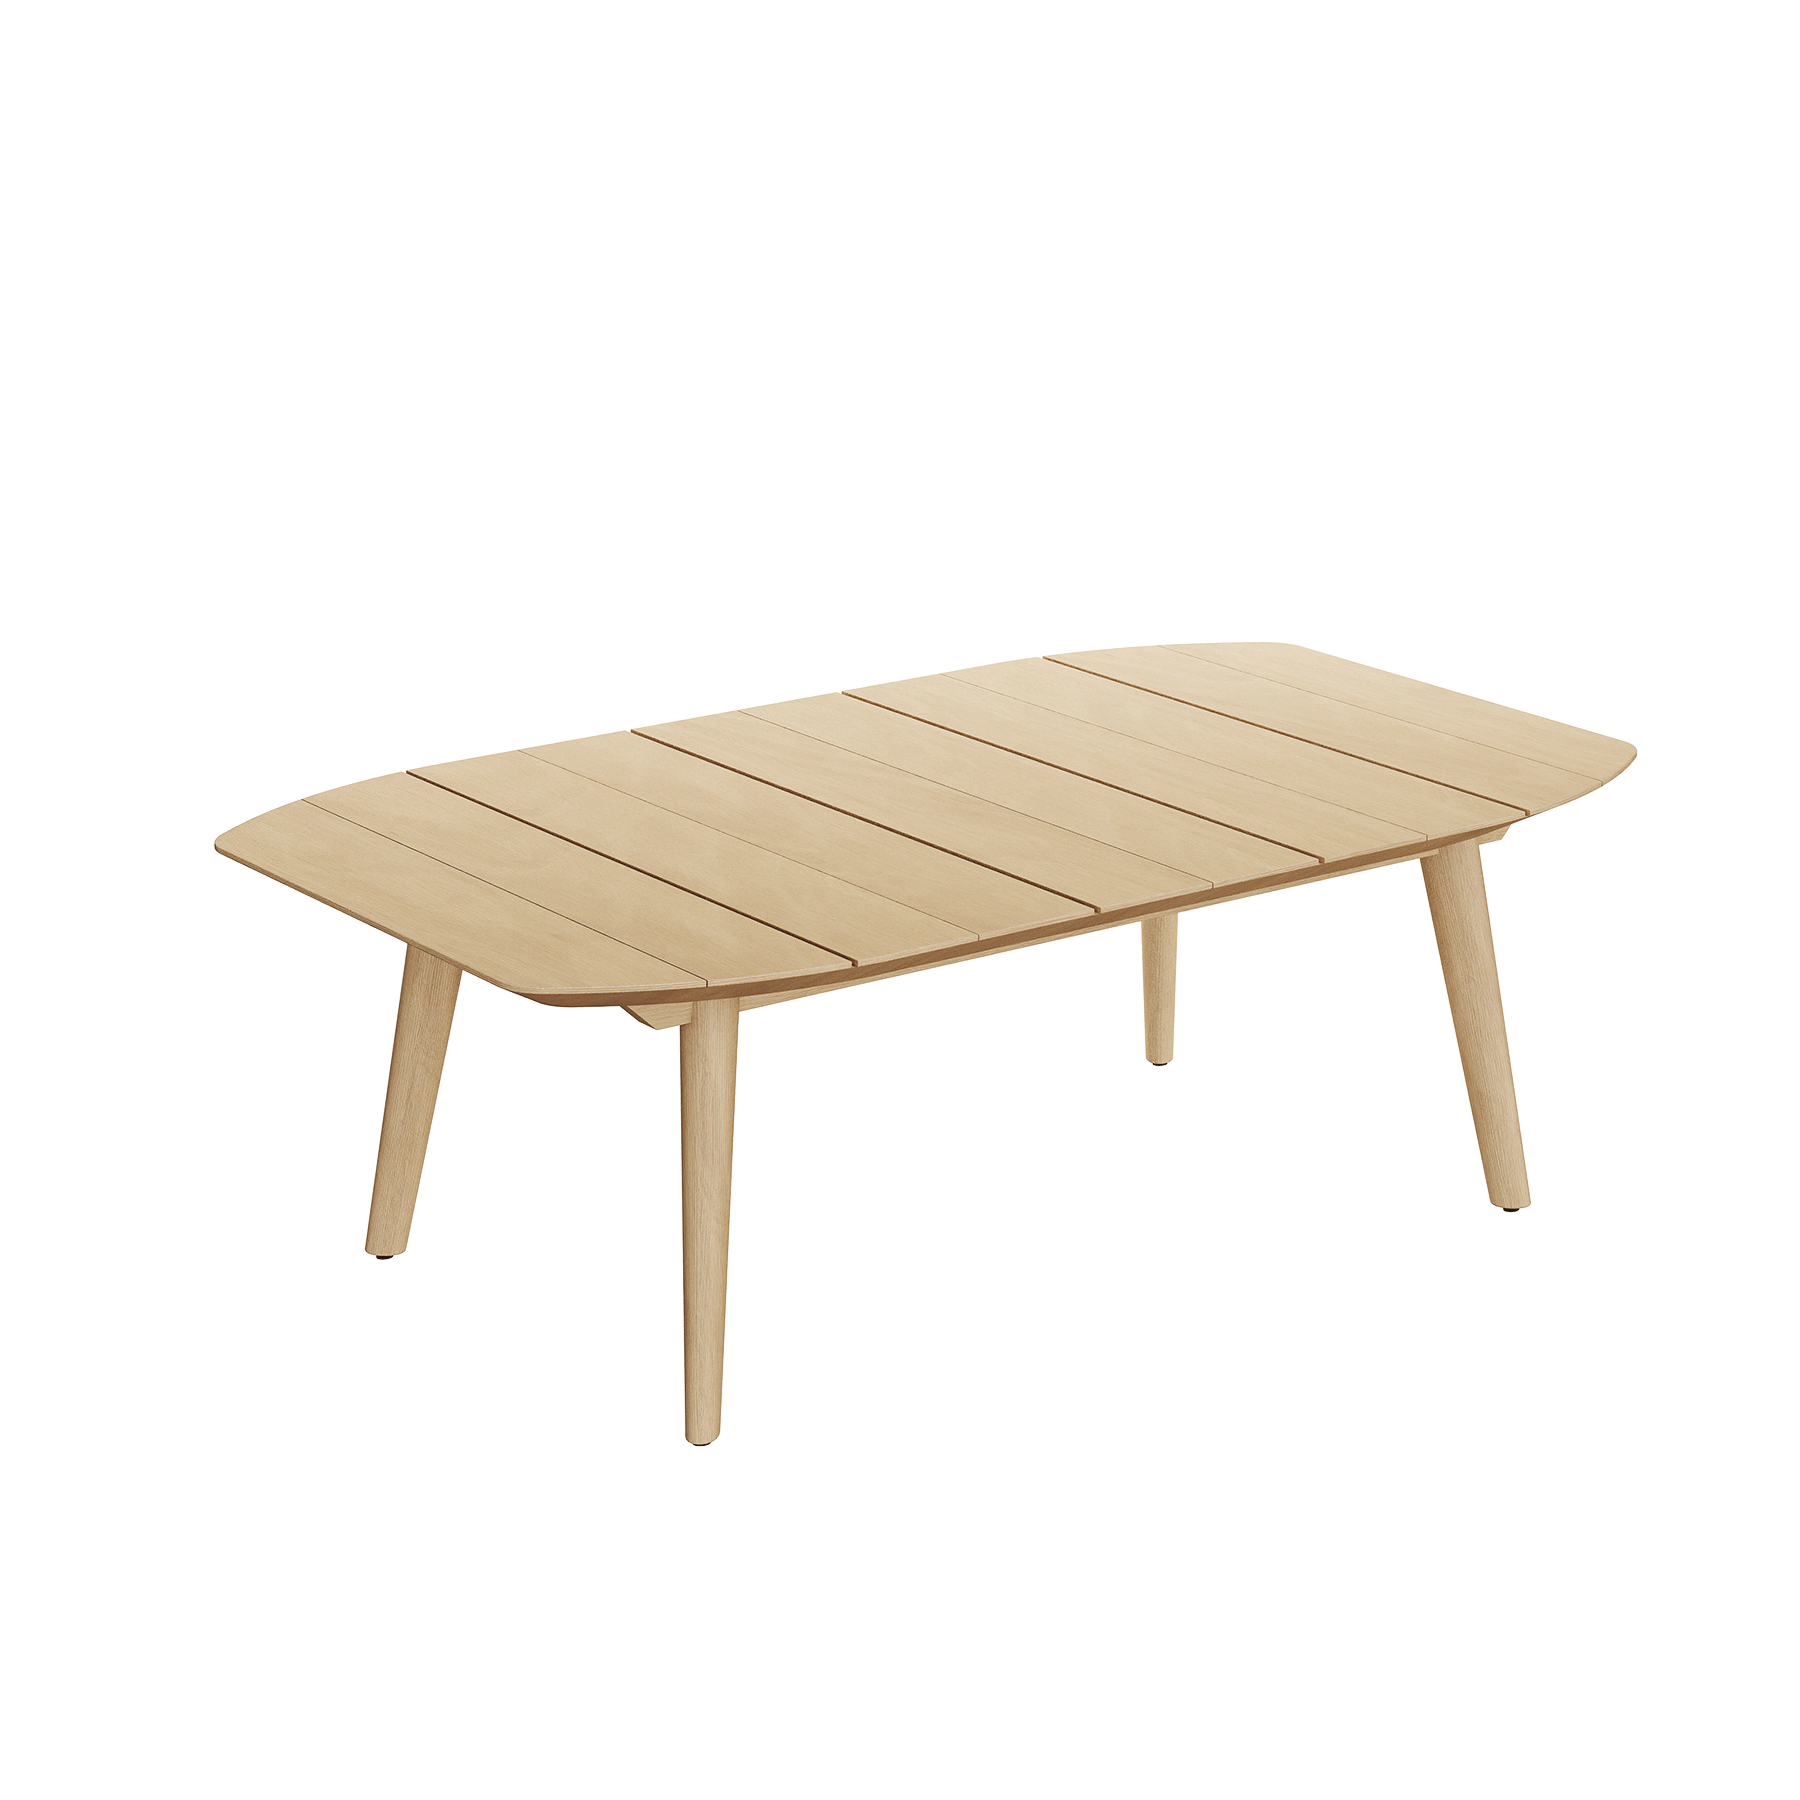 N1 luxury light teak outdoor furniture with mid century inspired rope detail garden coffee table